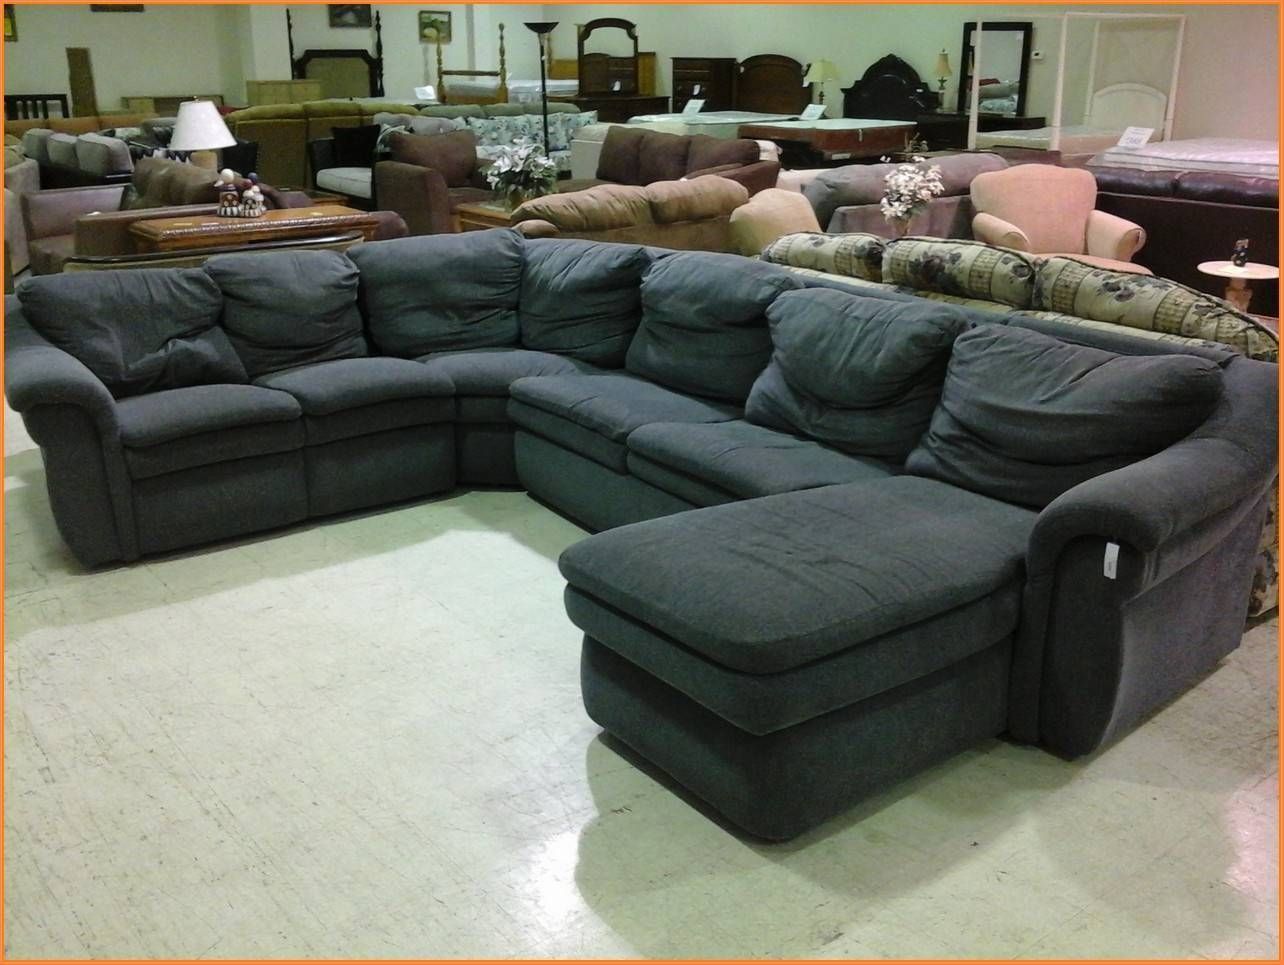 Sofas Center : Lazy Boy Sectional Sofas Stunning Sleeper Sofa On Pertaining To Lazyboy Sectional Sofas (View 4 of 25)